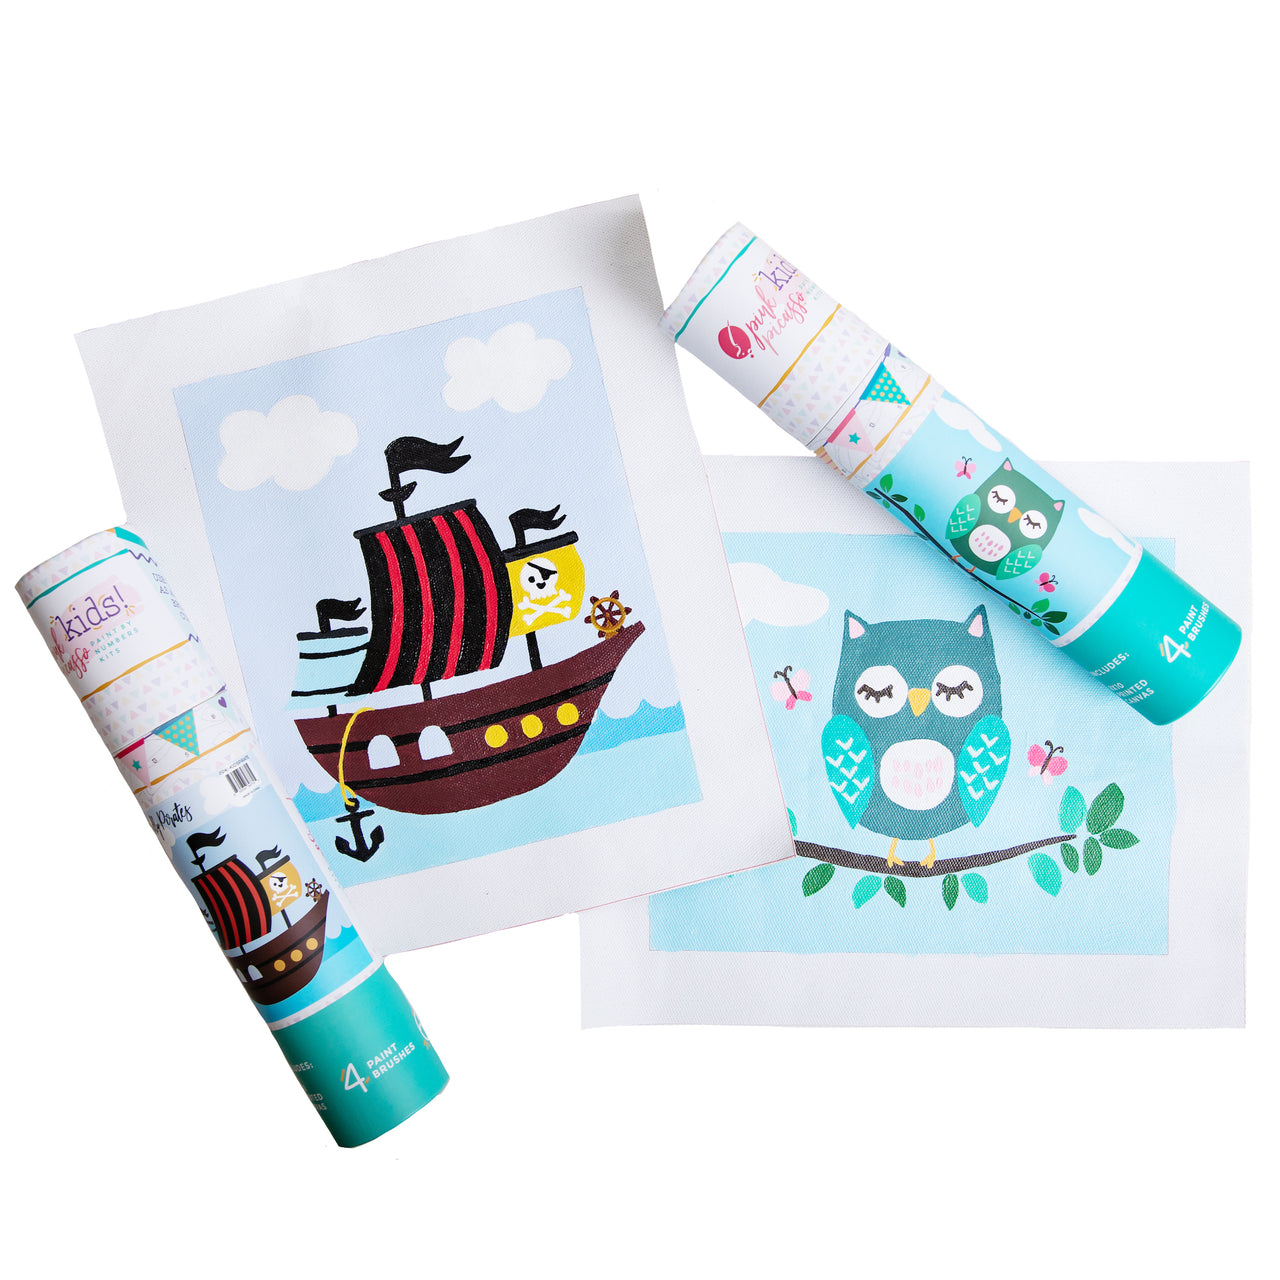 Olivia Owl - Pink Picasso Kits